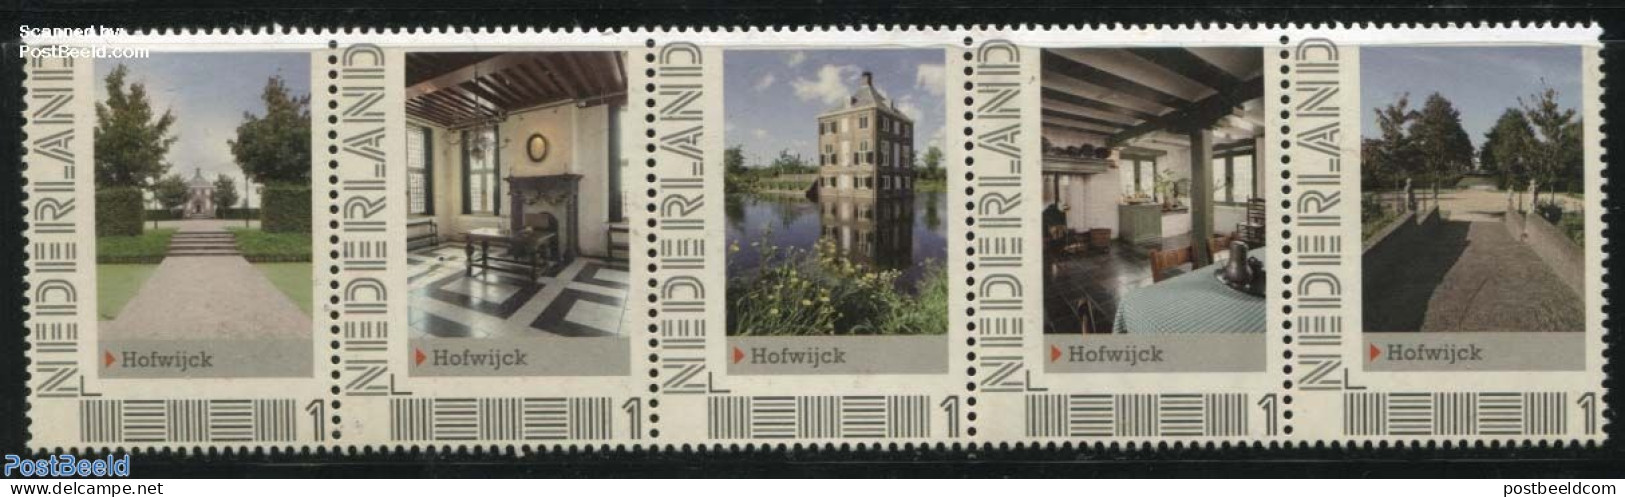 Netherlands - Personal Stamps TNT/PNL 2012 Hofwijck 5V [::::], Mint NH, Nature - Trees & Forests - Art - Castles & For.. - Rotary Club